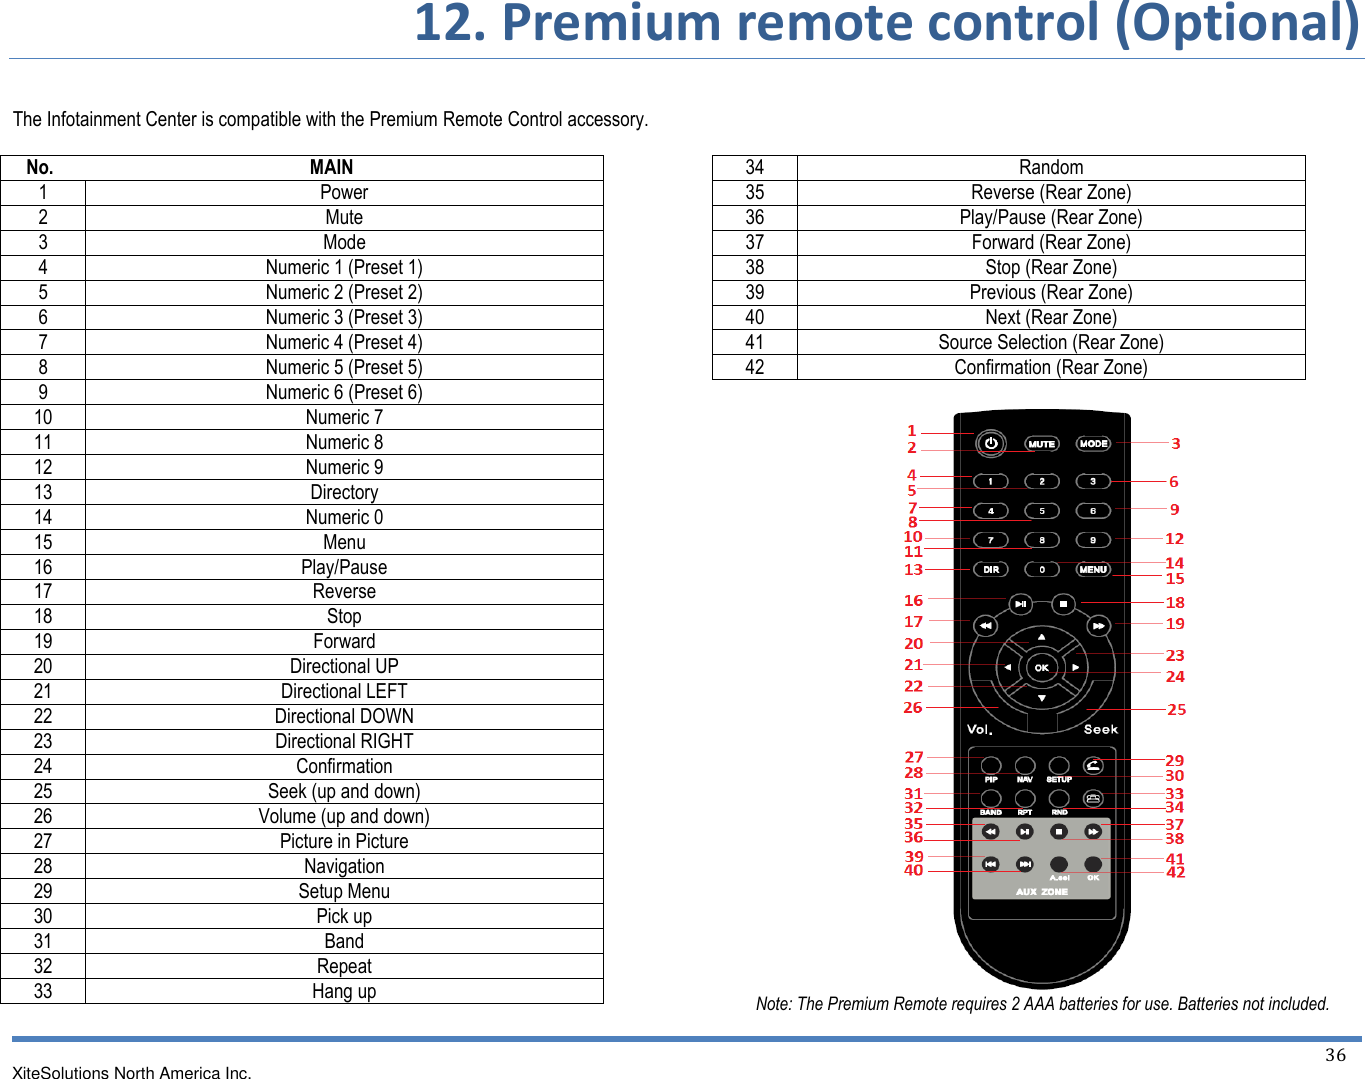       12. Premium remote control (Optional)   XiteSolutions North America Inc.  36   The Infotainment Center is compatible with the Premium Remote Control accessory.     No.                                                      MAIN 1 Power 2 Mute 3 Mode 4 Numeric 1 (Preset 1) 5 Numeric 2 (Preset 2) 6 Numeric 3 (Preset 3) 7 Numeric 4 (Preset 4) 8 Numeric 5 (Preset 5) 9 Numeric 6 (Preset 6) 10 Numeric 7 11 Numeric 8 12 Numeric 9 13 Directory 14 Numeric 0 15 Menu 16 Play/Pause 17 Reverse 18 Stop 19 Forward 20 Directional UP 21 Directional LEFT 22 Directional DOWN 23 Directional RIGHT 24 Confirmation 25 Seek (up and down) 26 Volume (up and down) 27 Picture in Picture 28 Navigation 29 Setup Menu 30 Pick up 31 Band 32 Repeat 33 Hang up     34 Random 35 Reverse (Rear Zone) 36 Play/Pause (Rear Zone) 37 Forward (Rear Zone) 38 Stop (Rear Zone) 39 Previous (Rear Zone) 40 Next (Rear Zone) 41 Source Selection (Rear Zone) 42 Confirmation (Rear Zone)   Note: The Premium Remote requires 2 AAA batteries for use. Batteries not included.